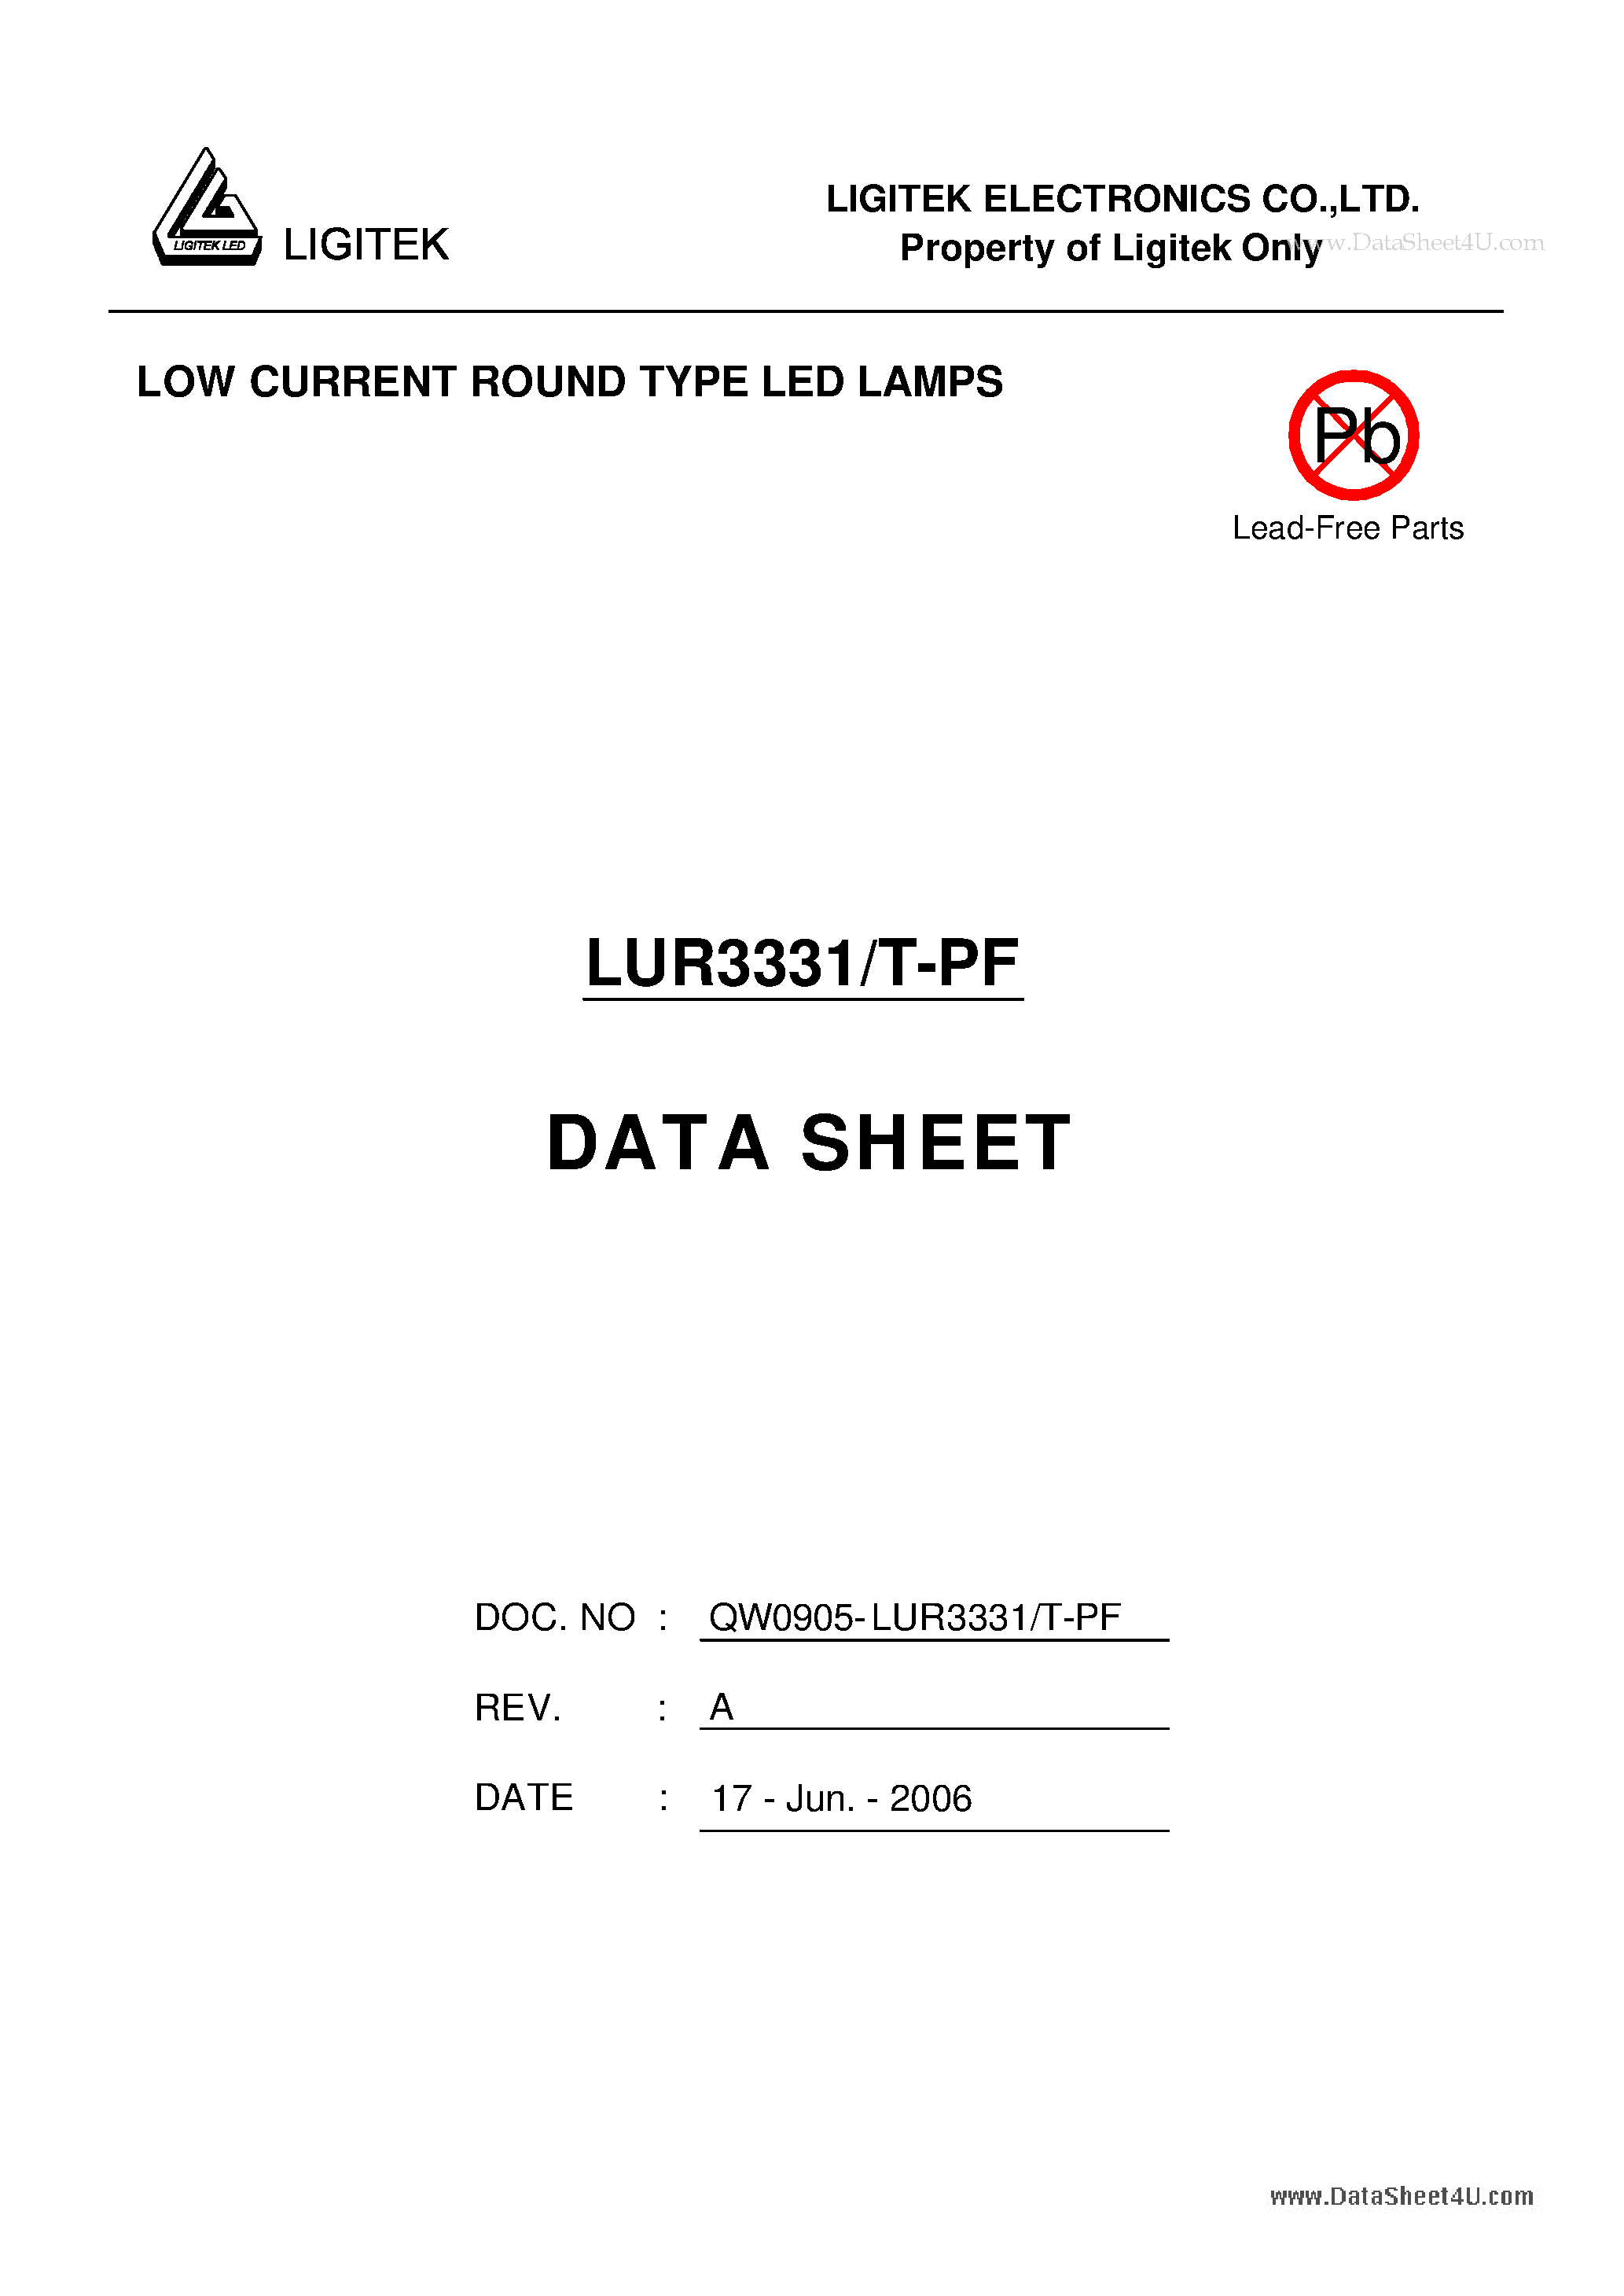 Datasheet LUR3331-T-PF - LOW CURRENT ROUND TYPE LED LAMPS page 1